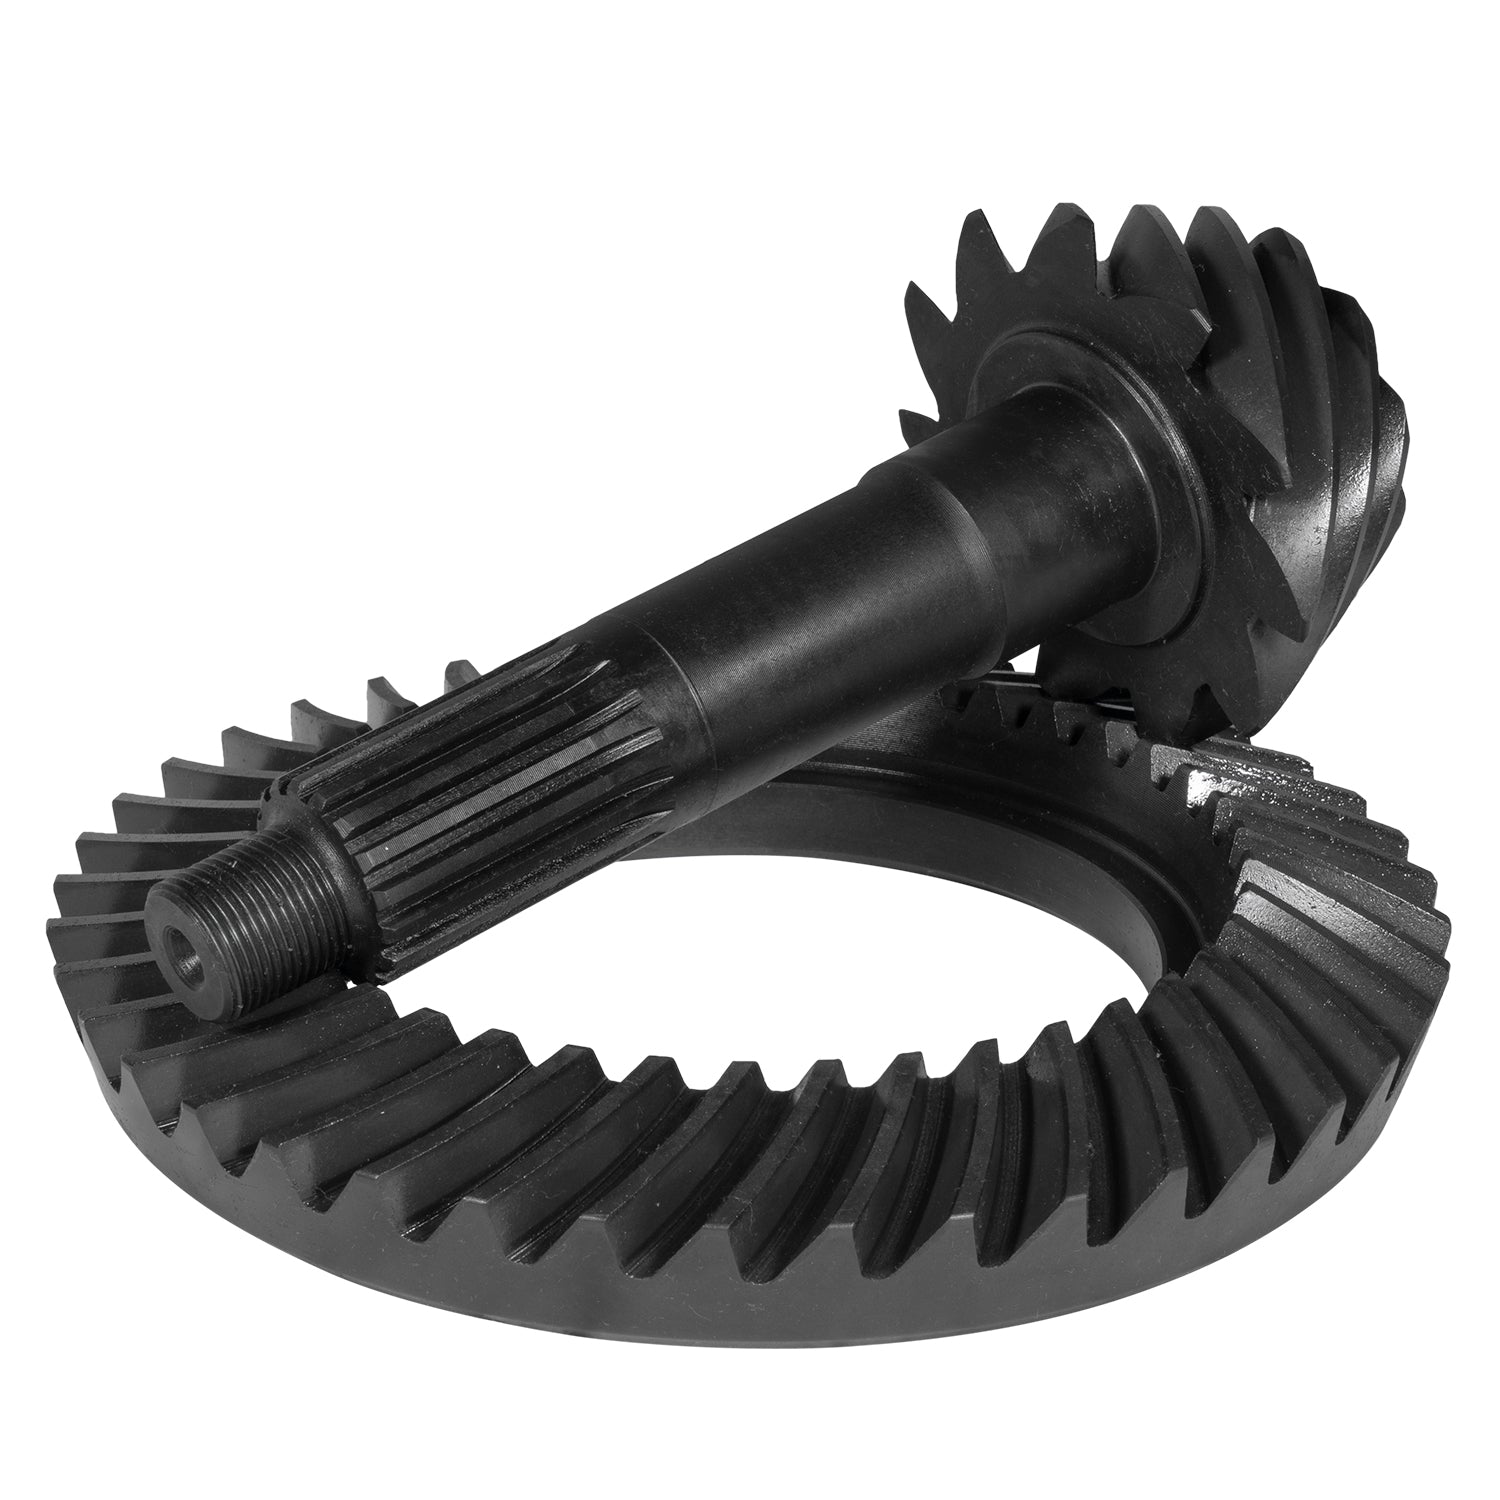 Yukon Gear Chevrolet Differential Ring and Pinion Kit - Rear YGK2371